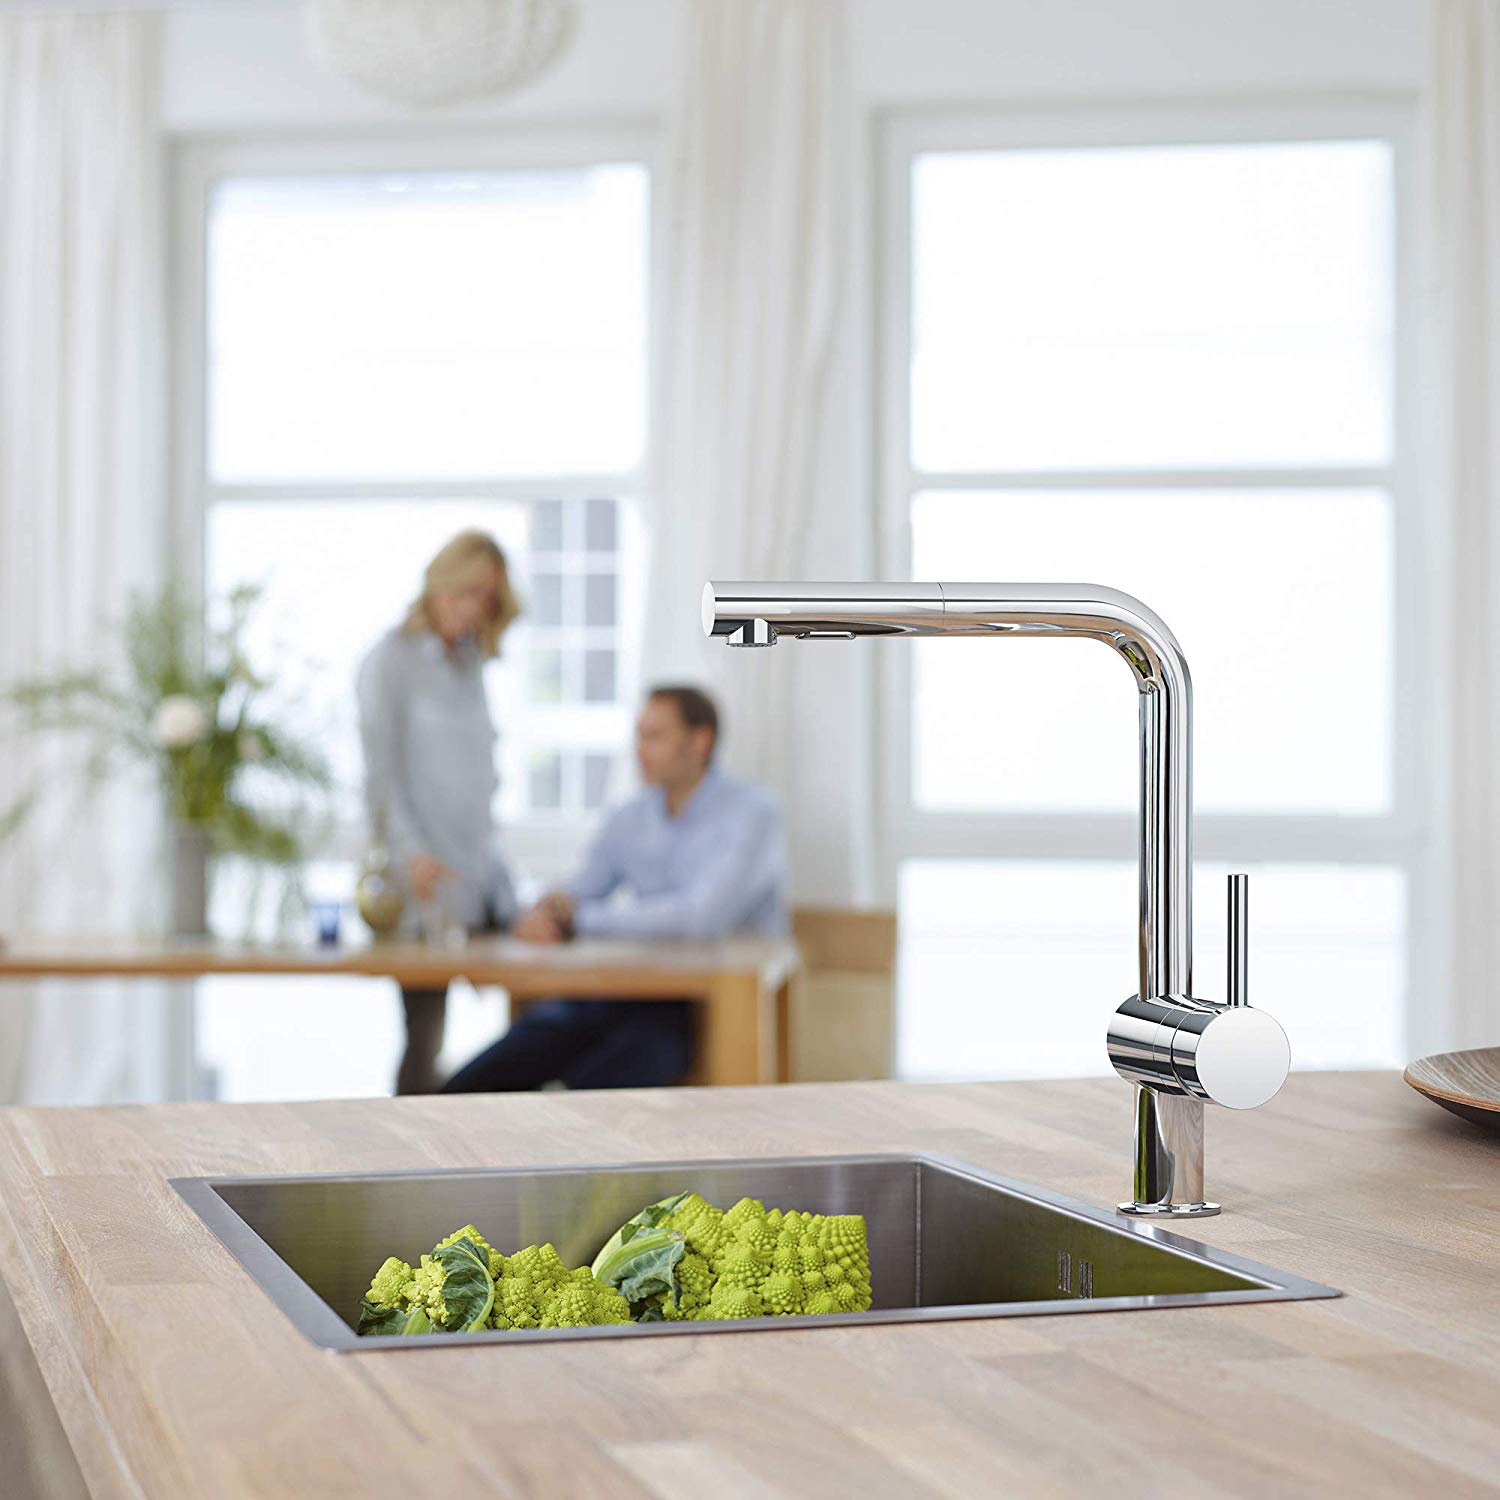 Aquacubic cUPC Sanitary Contemporary best selling Single Handle Kitchen Sink Pull Out Kitchen Faucet / tap